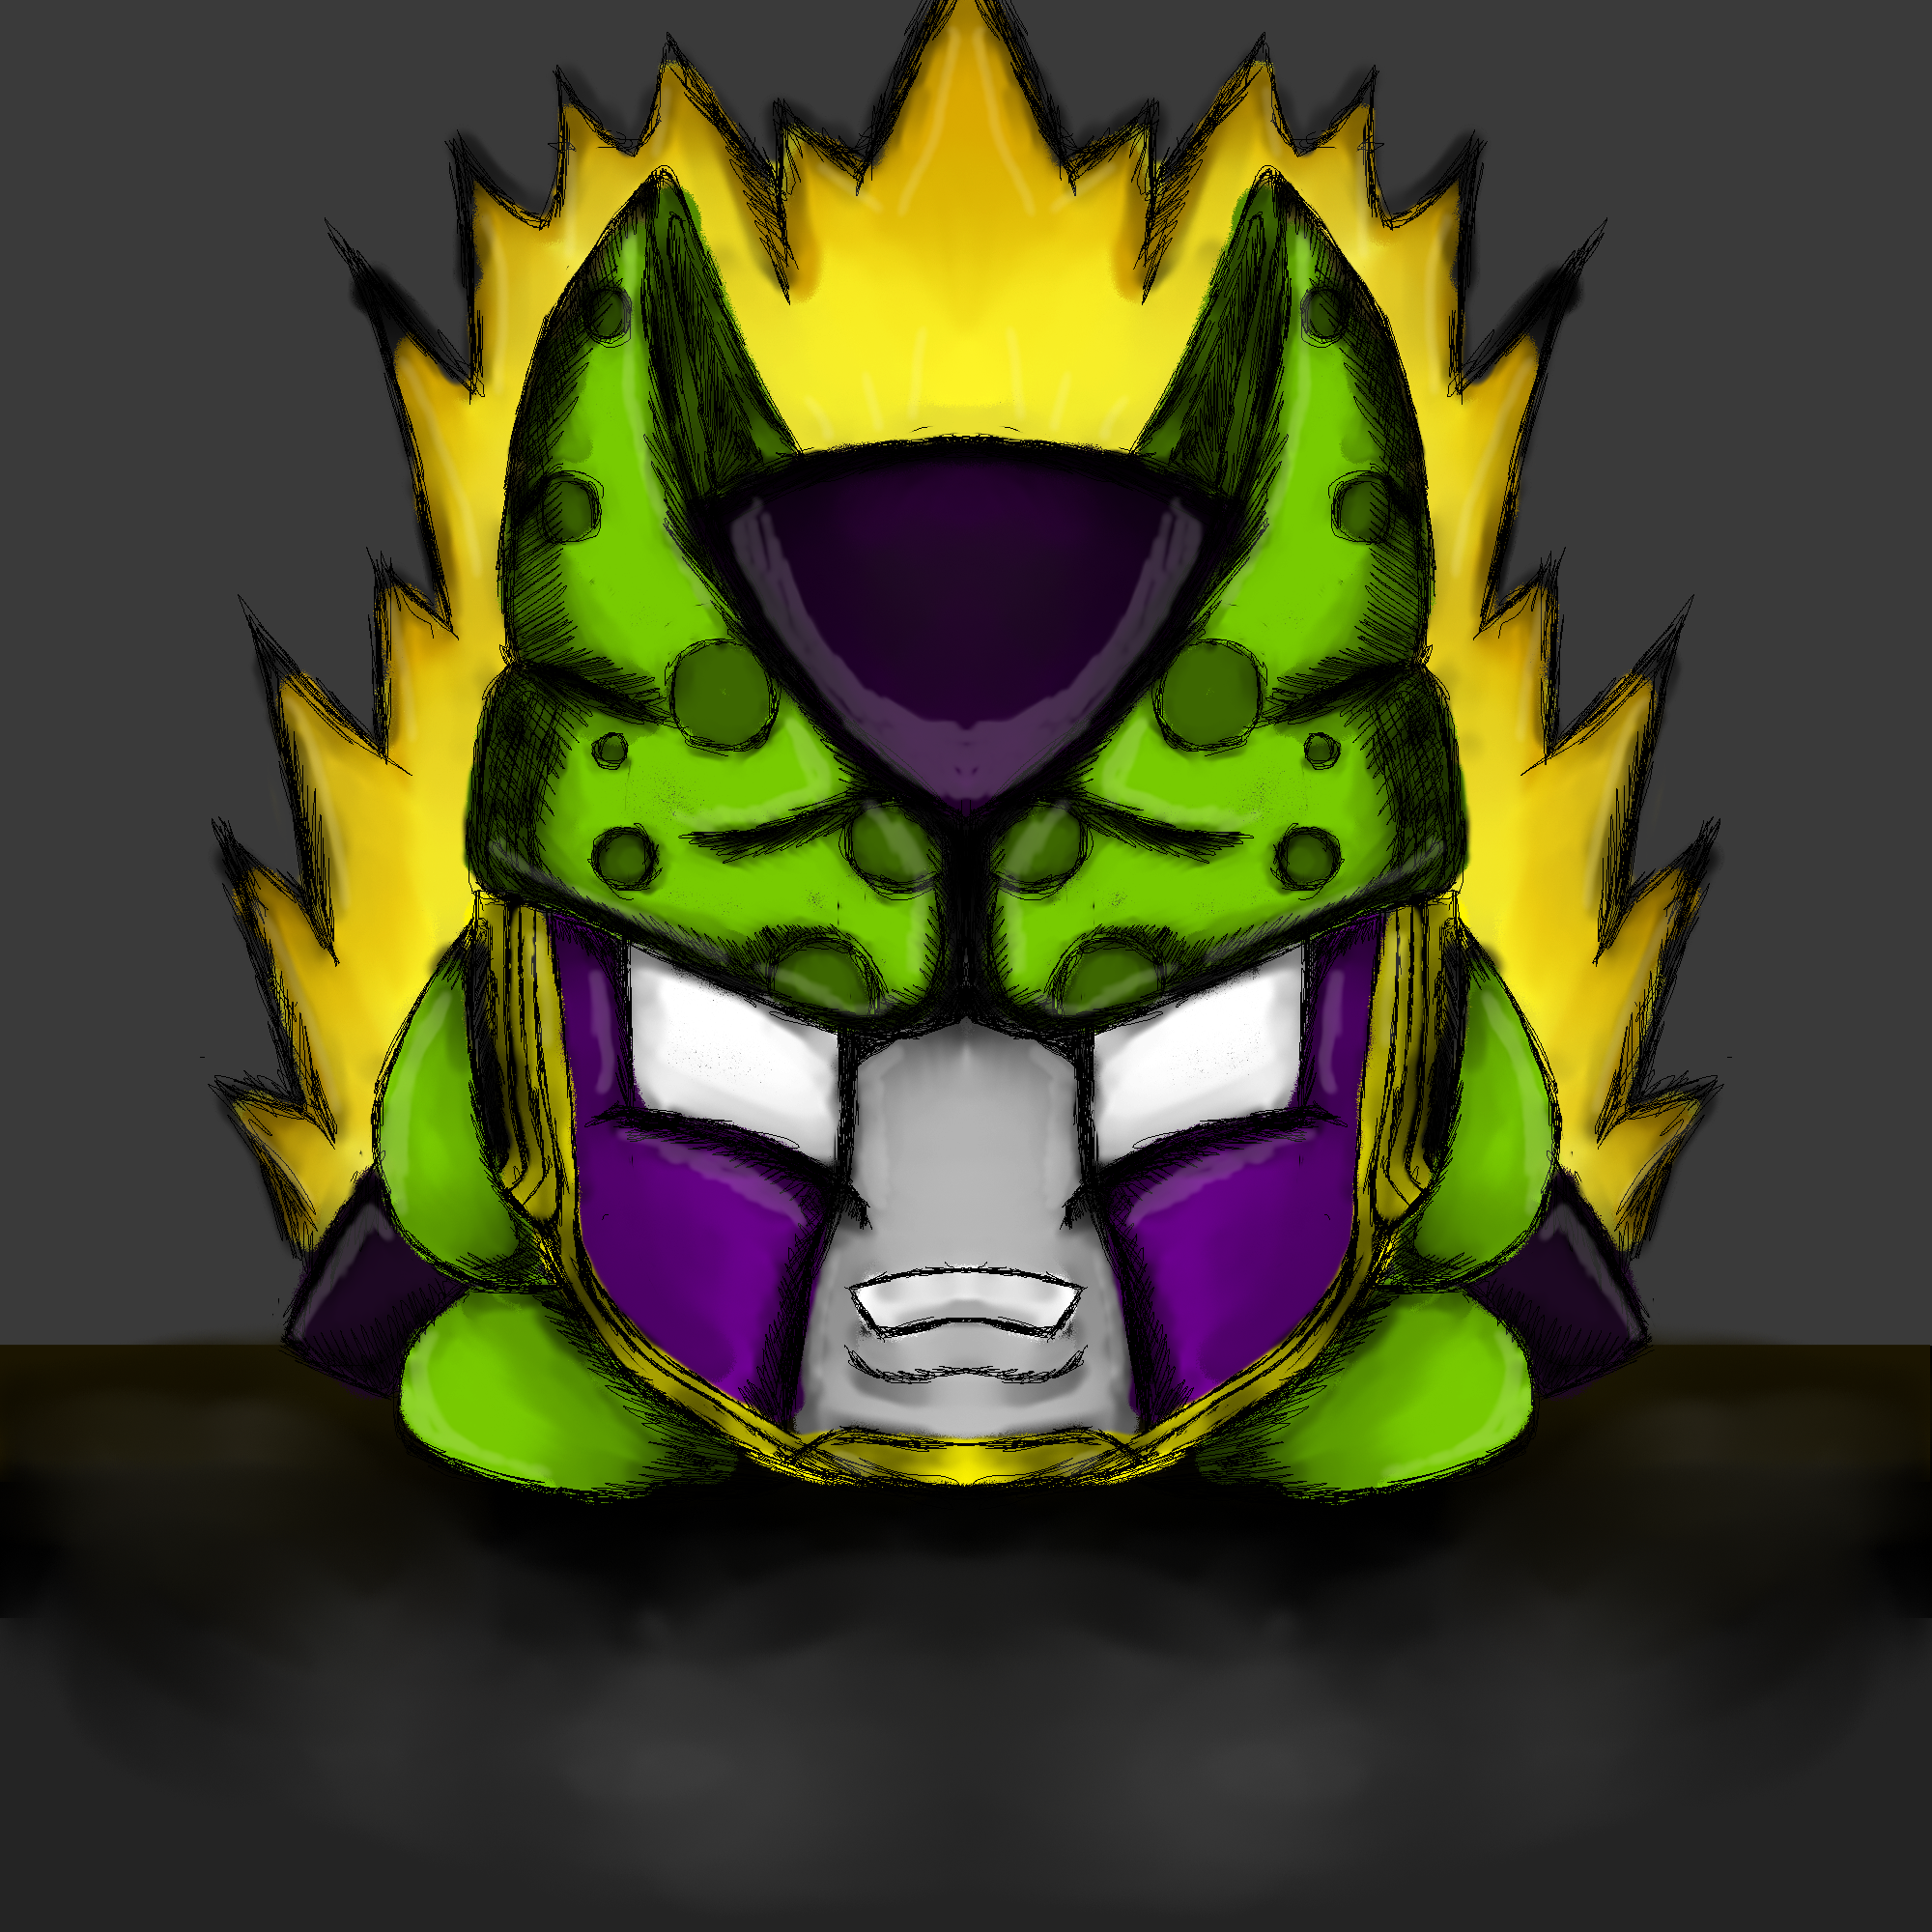 Dragon ball Kirby - Perfect Cell Kirby by dragonfire53511 on DeviantArt